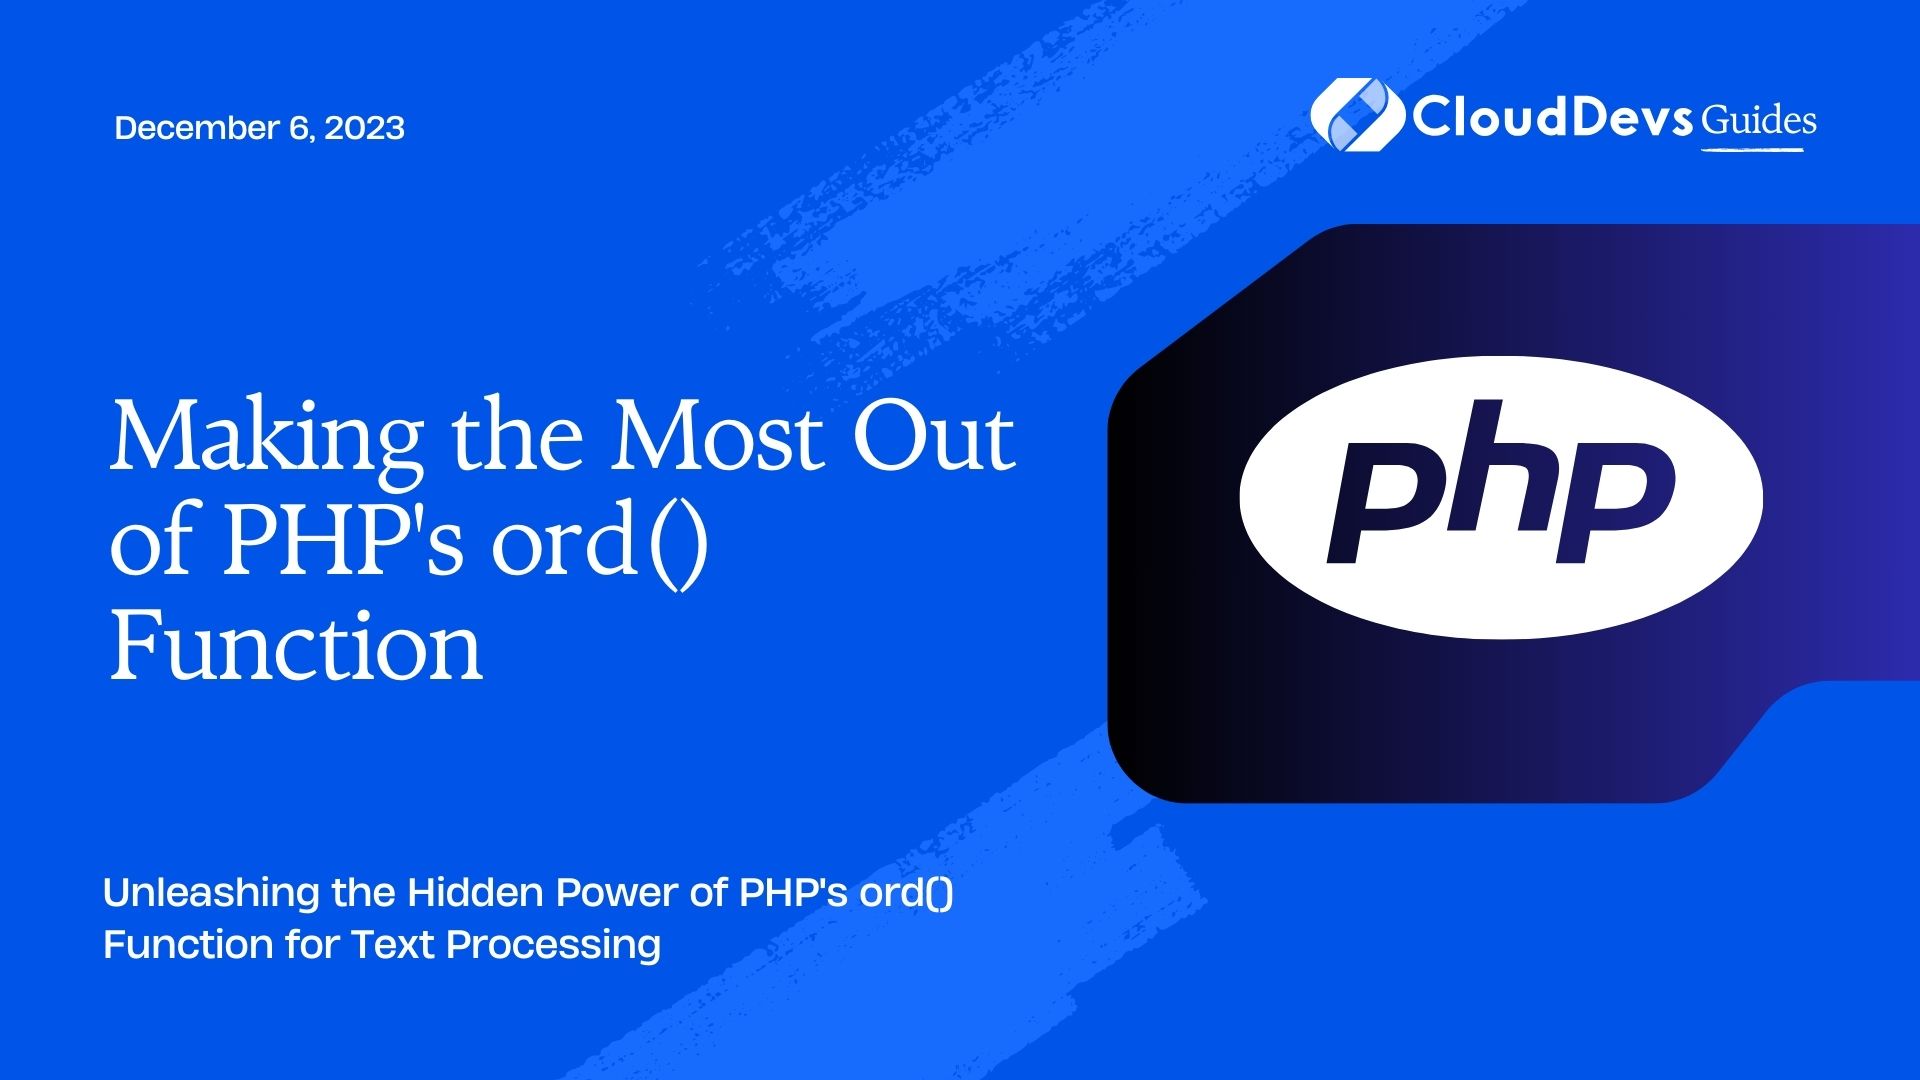 Making the Most Out of PHP's ord() Function